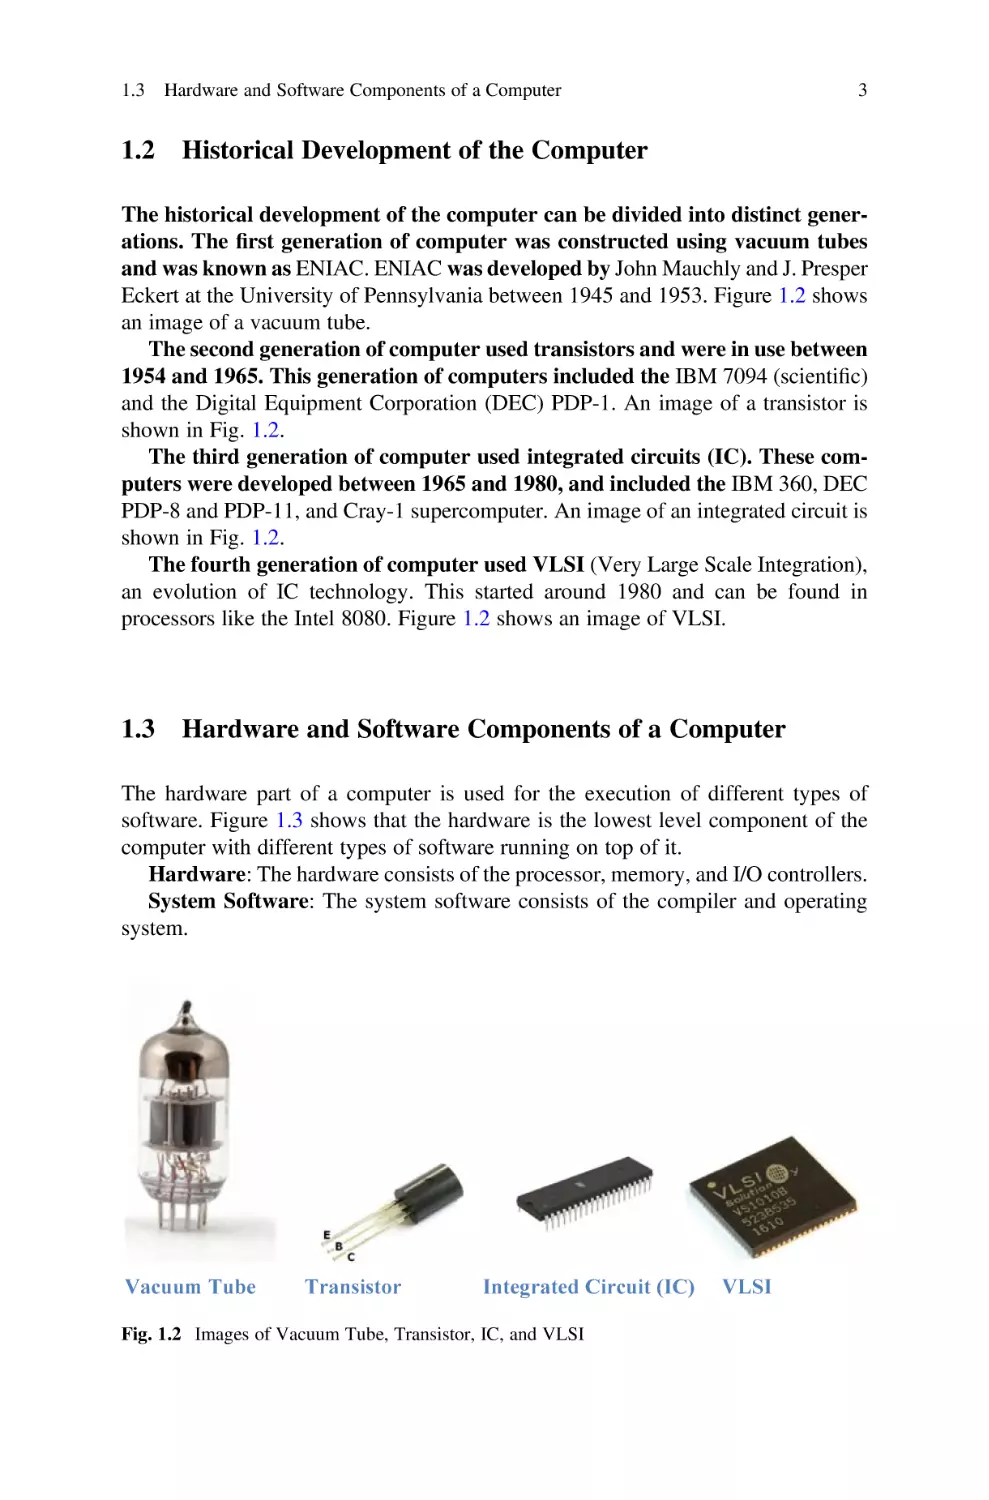 1.2 Historical Development of the Computer
1.3 Hardware and Software Components of a Computer